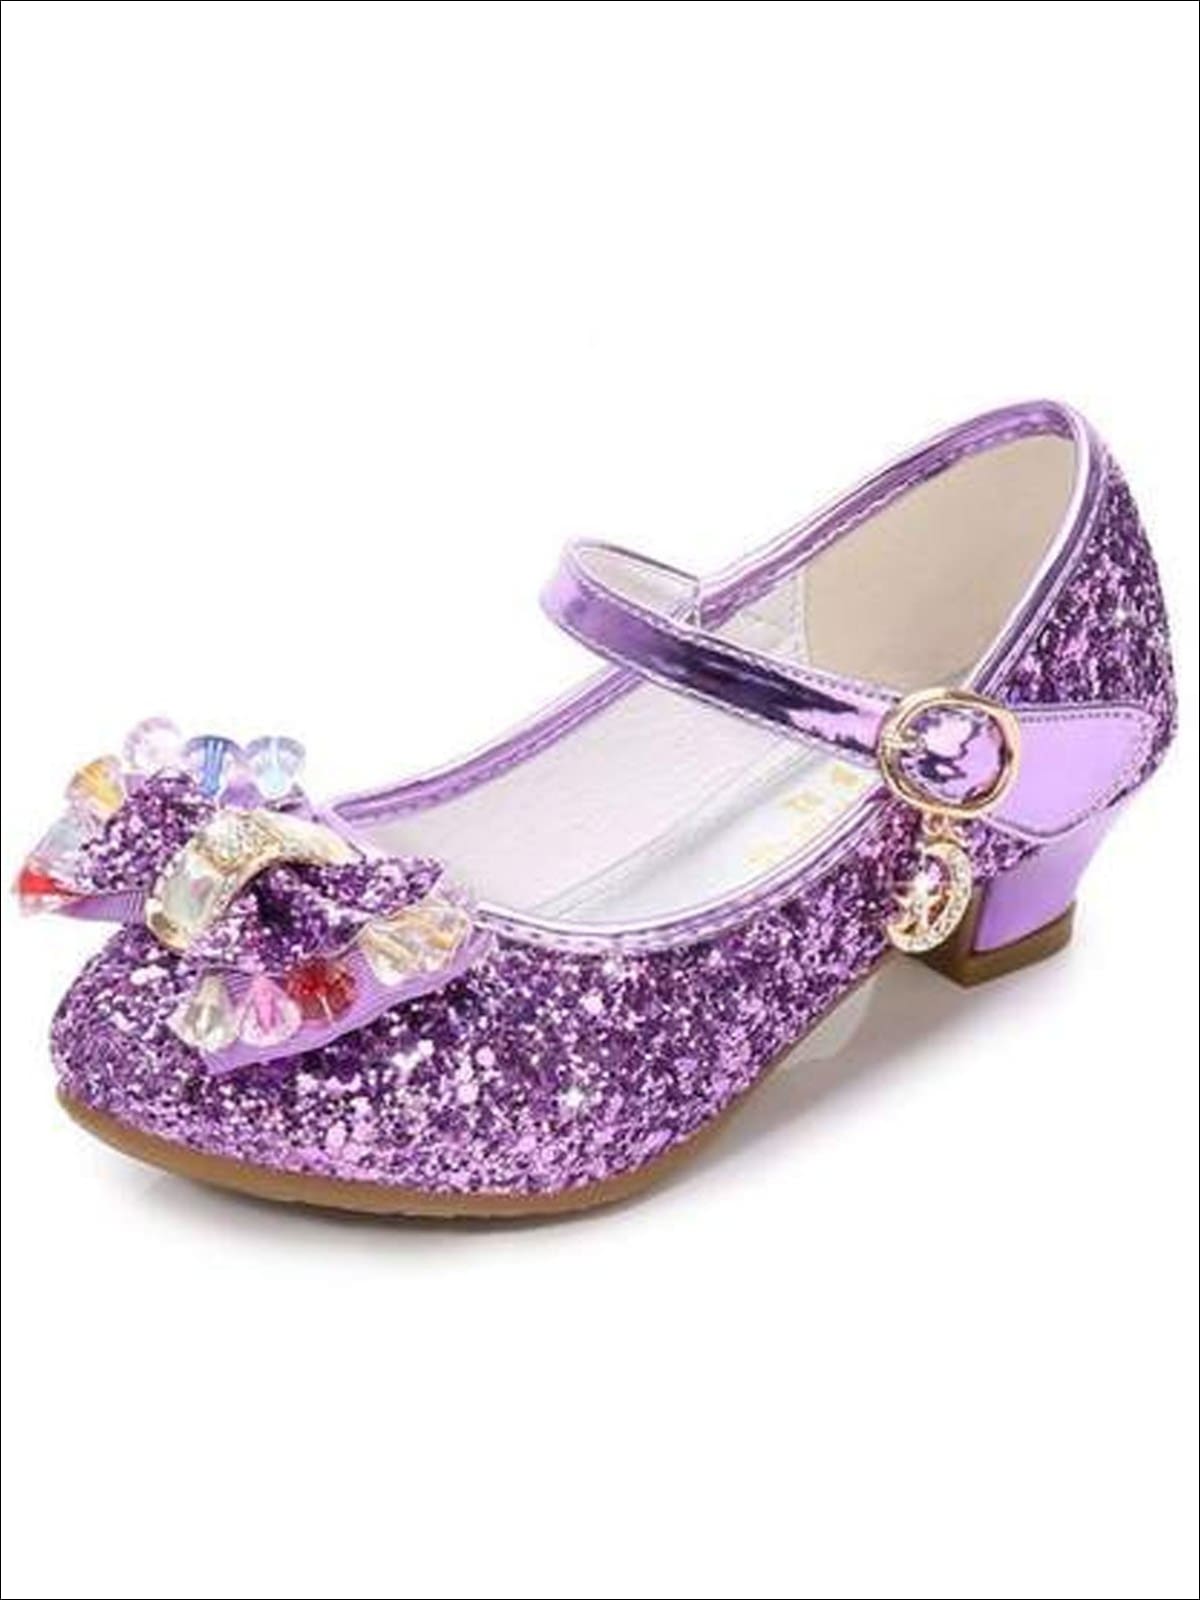 Girls Gem Bow Tie Glitter Princess Shoes By Liv and Mia - Purple / 1 - Girls Flats